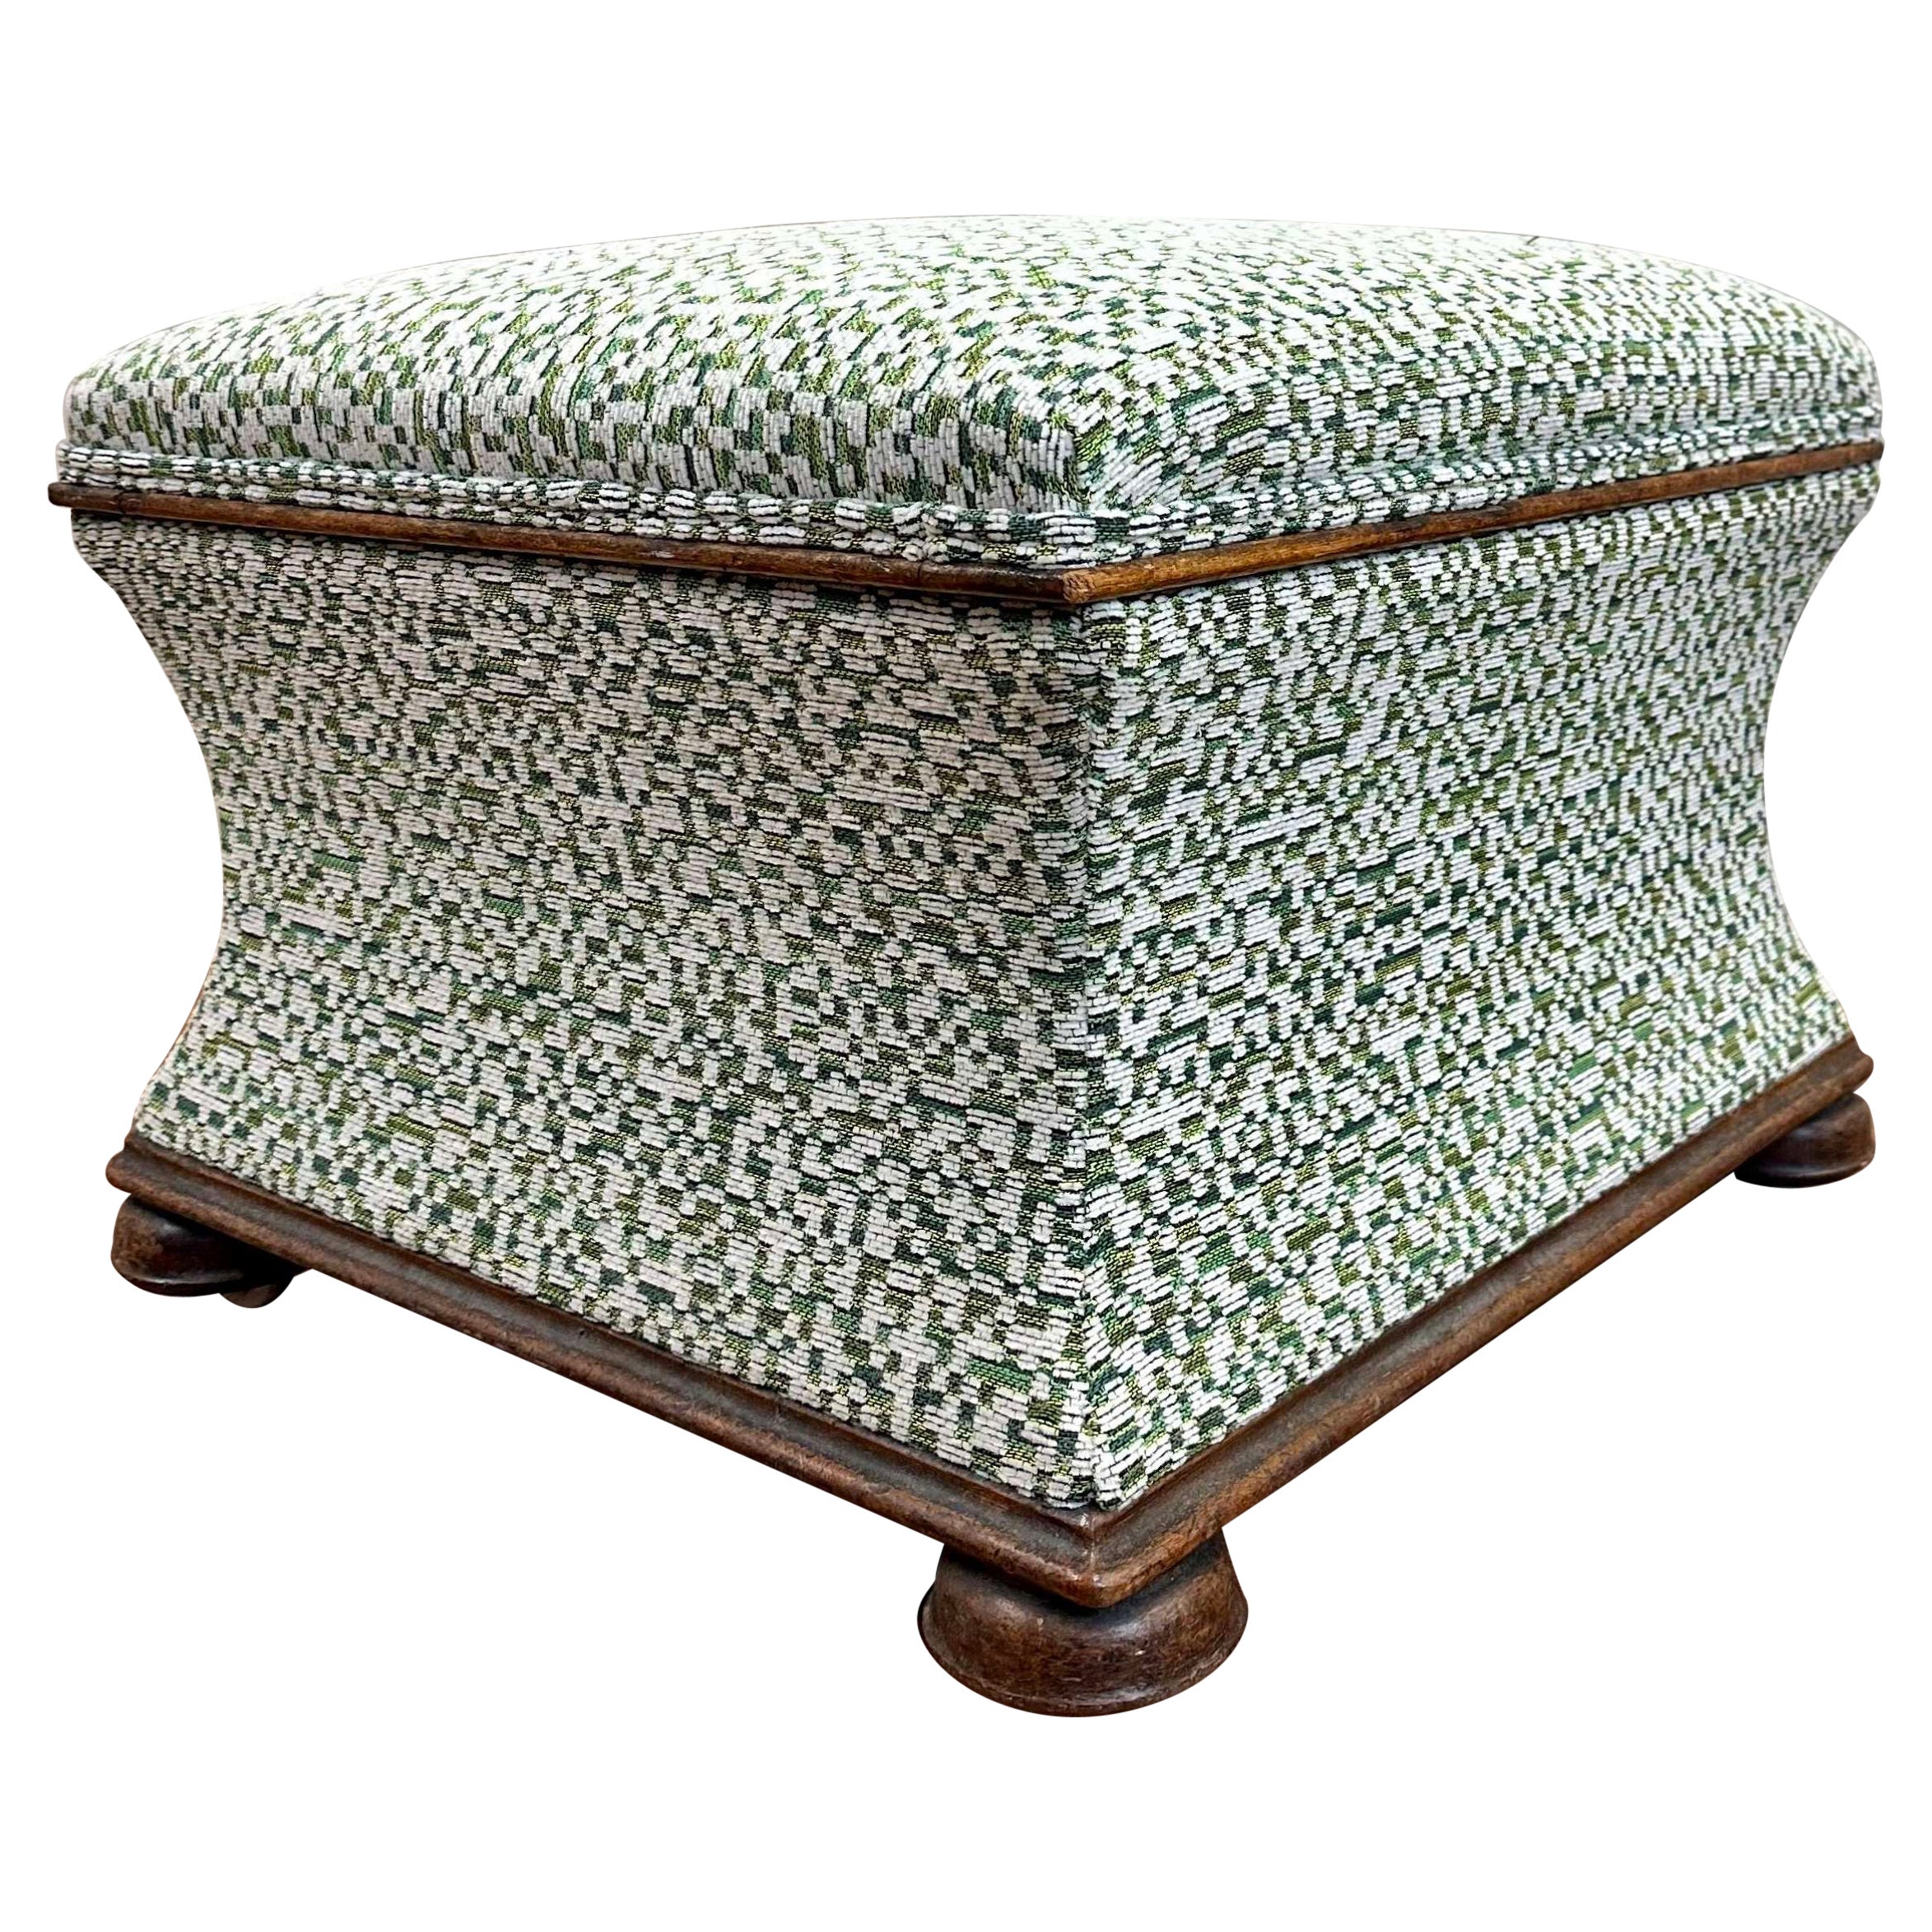 19th Century English upholstered Ottoman Footstool For Sale